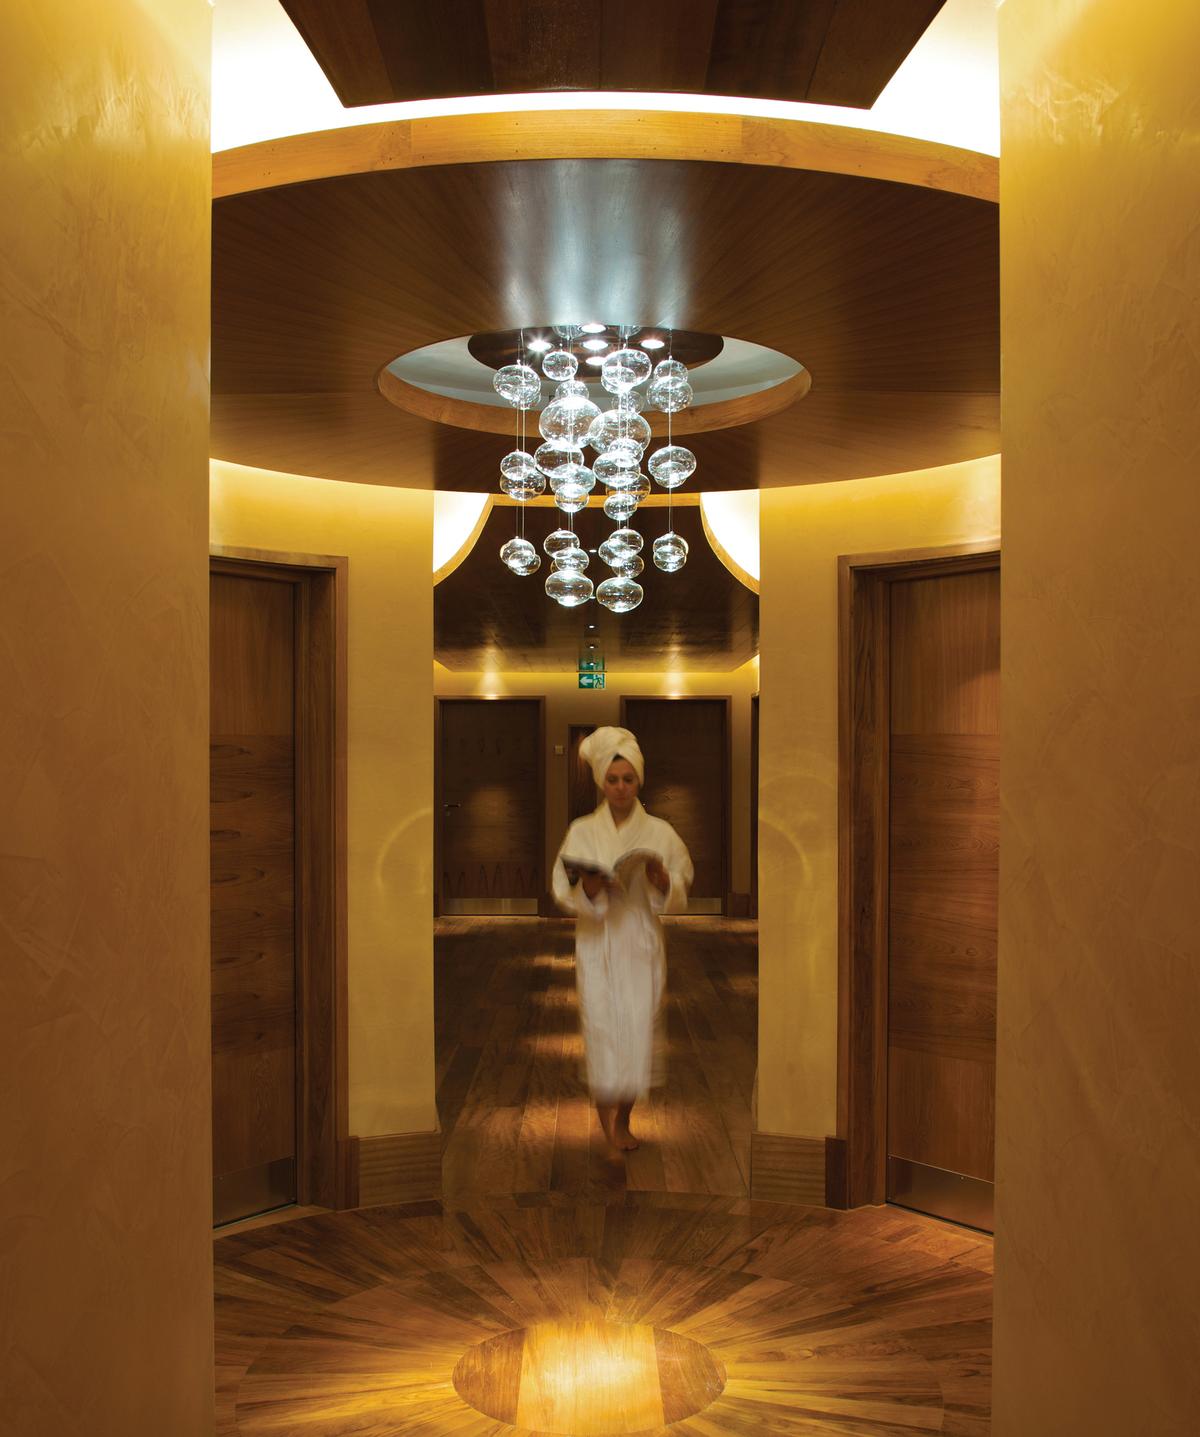 The spa is one of only three ESPA-branded spas in the UK / 